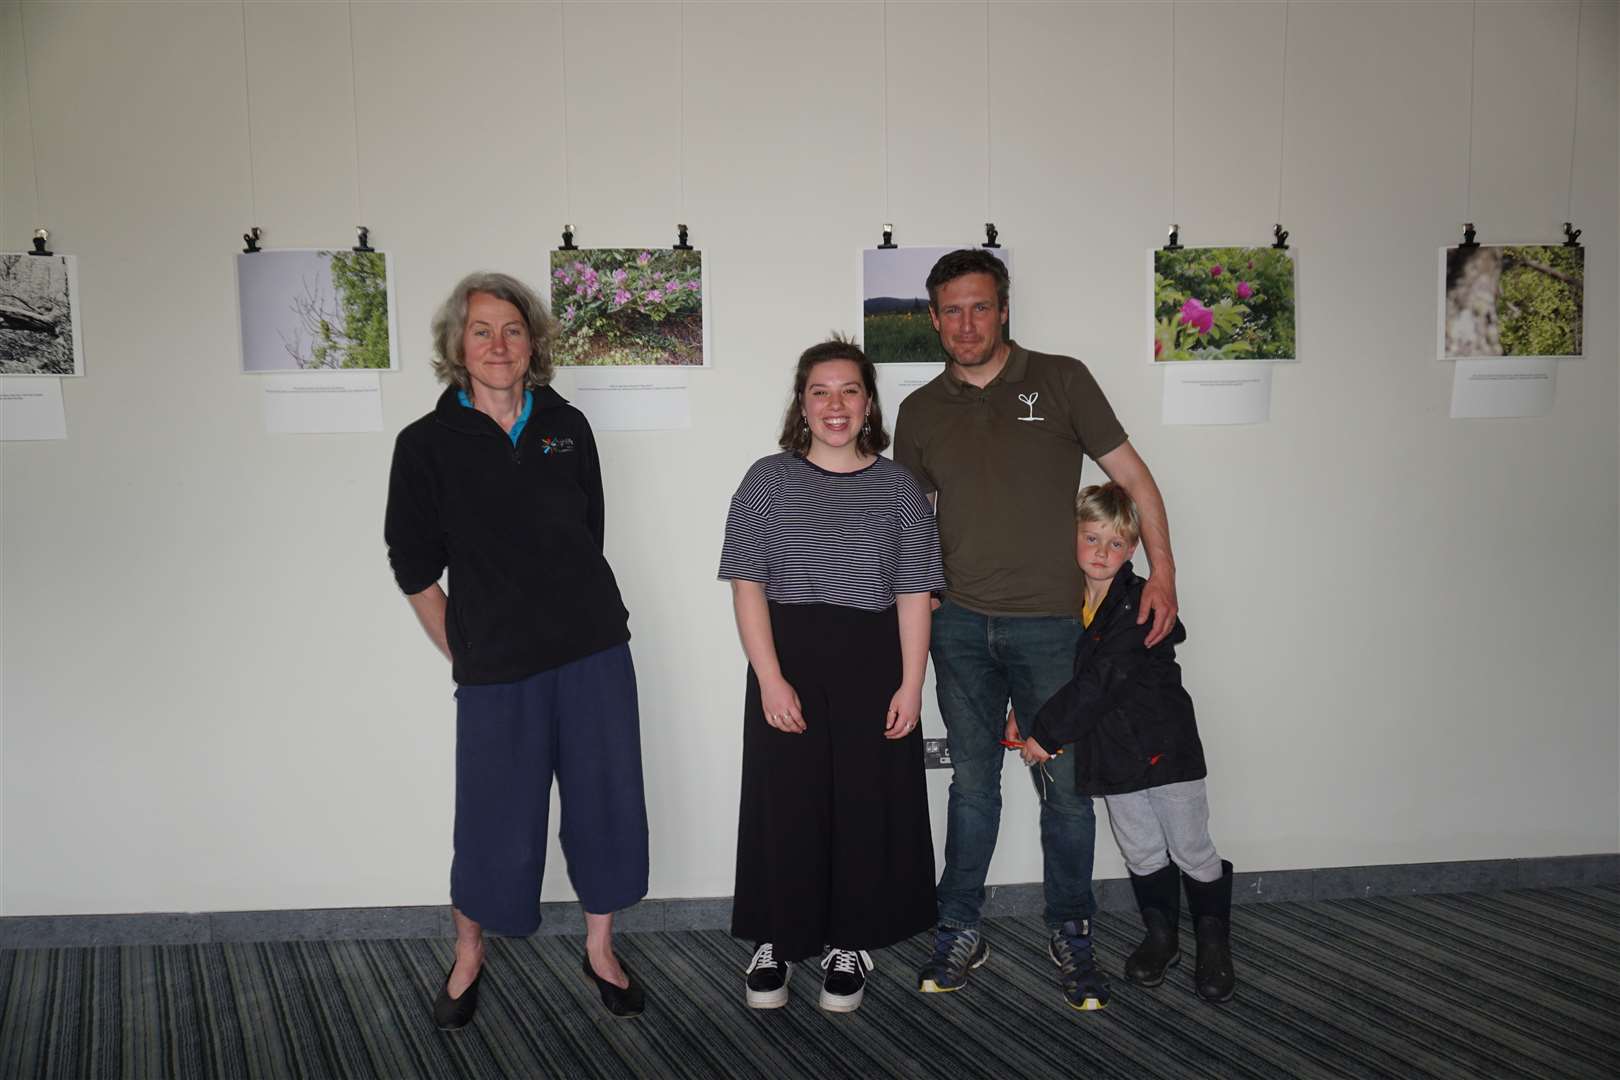 Imogen Furlong (Outdoor Activities Manager for High Life Highland), Mollie Saunders and Alan McDonnell (Programme Development Manager at Trees for Life) at the exhibition opening. Pictures bu: Federica Stefani.